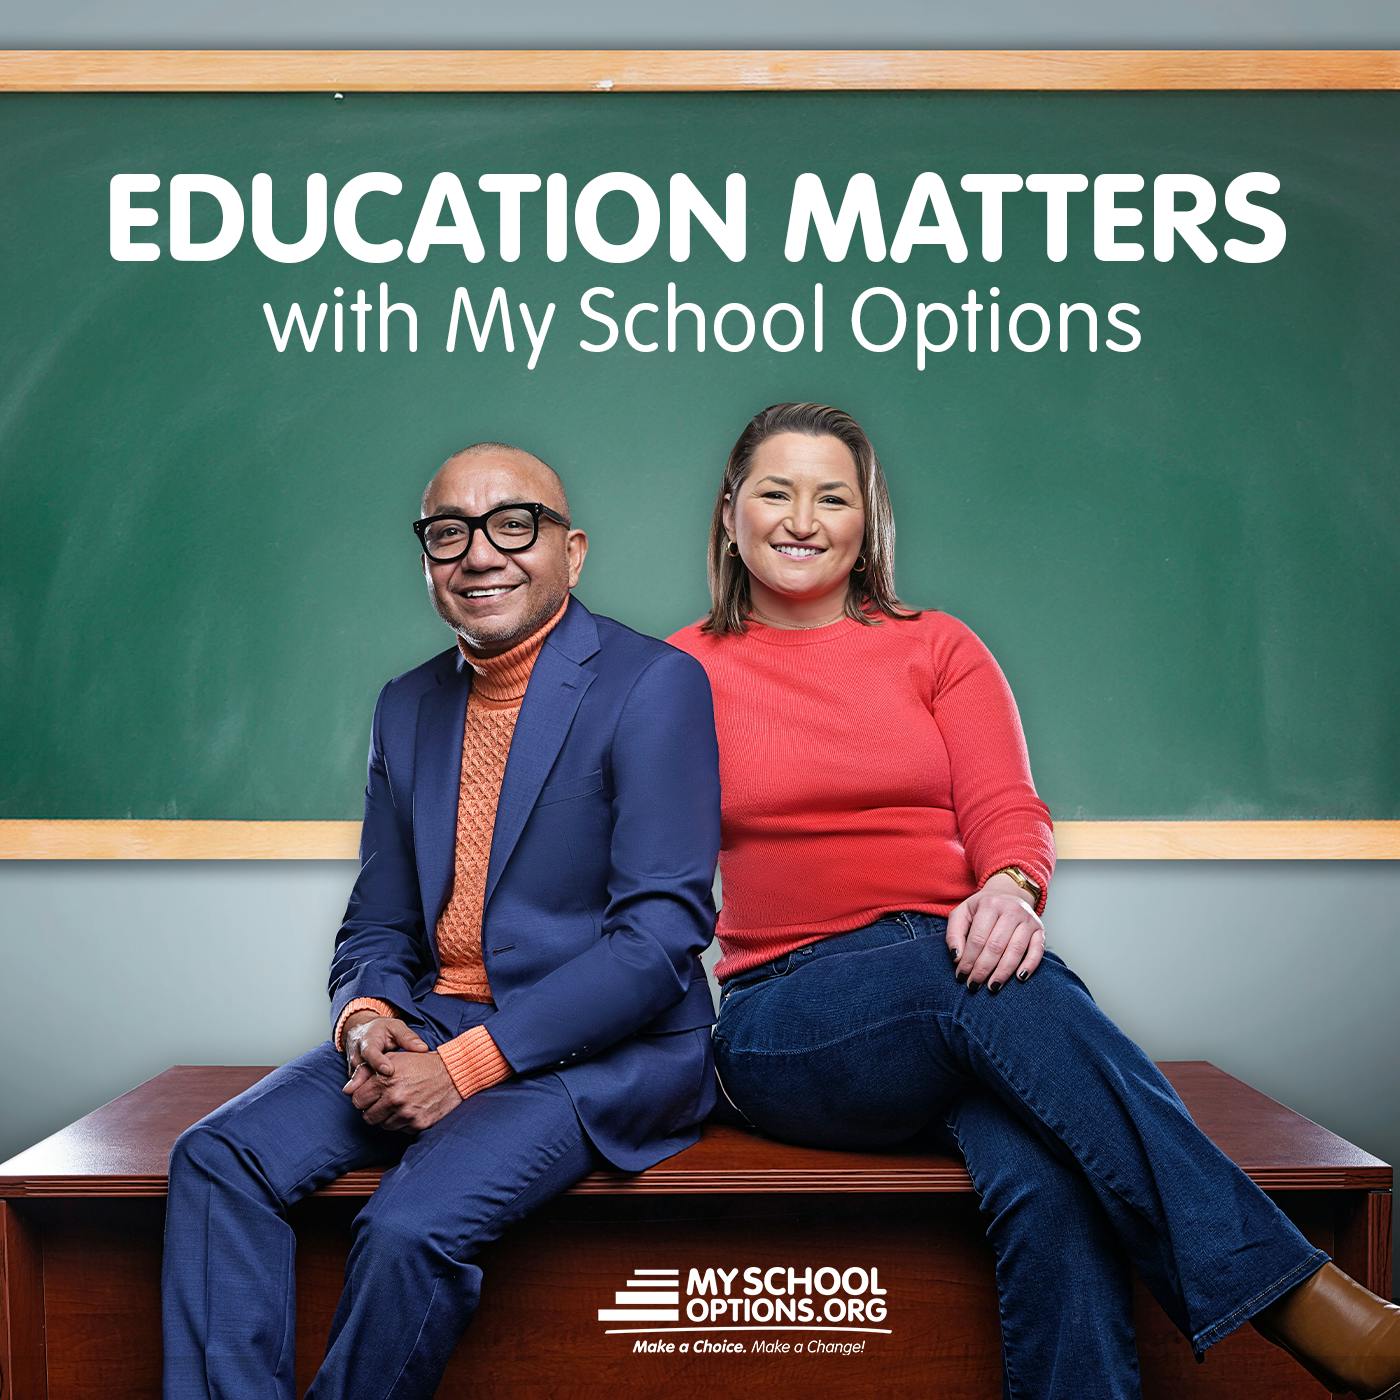 Episode 3 - The Power of Education: A Conversation with Betsy J. Wiley, CEO of the Institute for Quality Education